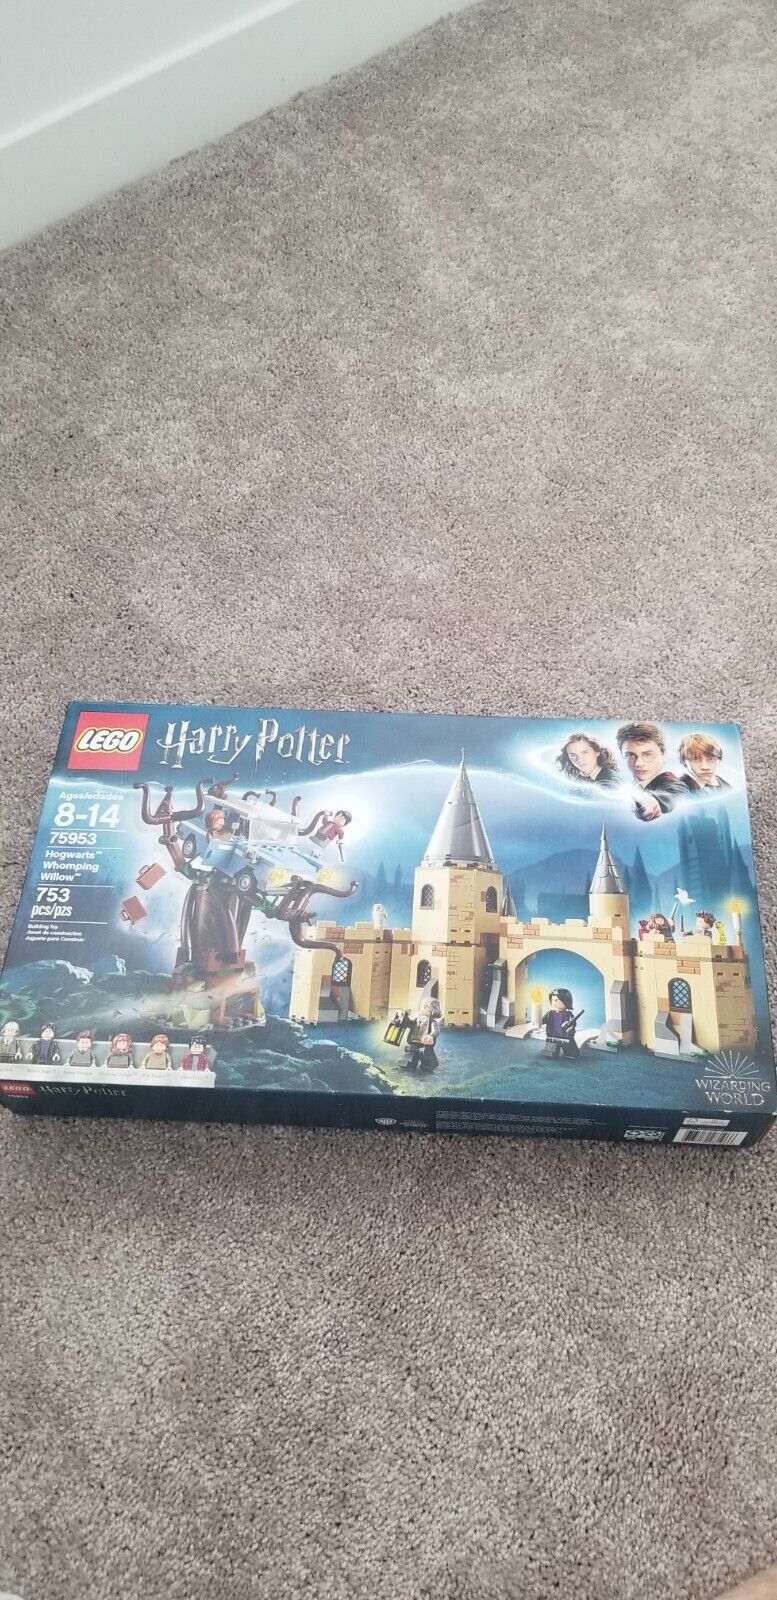 LEGO Hogwarts Whomping Willow Harry Potter (75953) new unopened